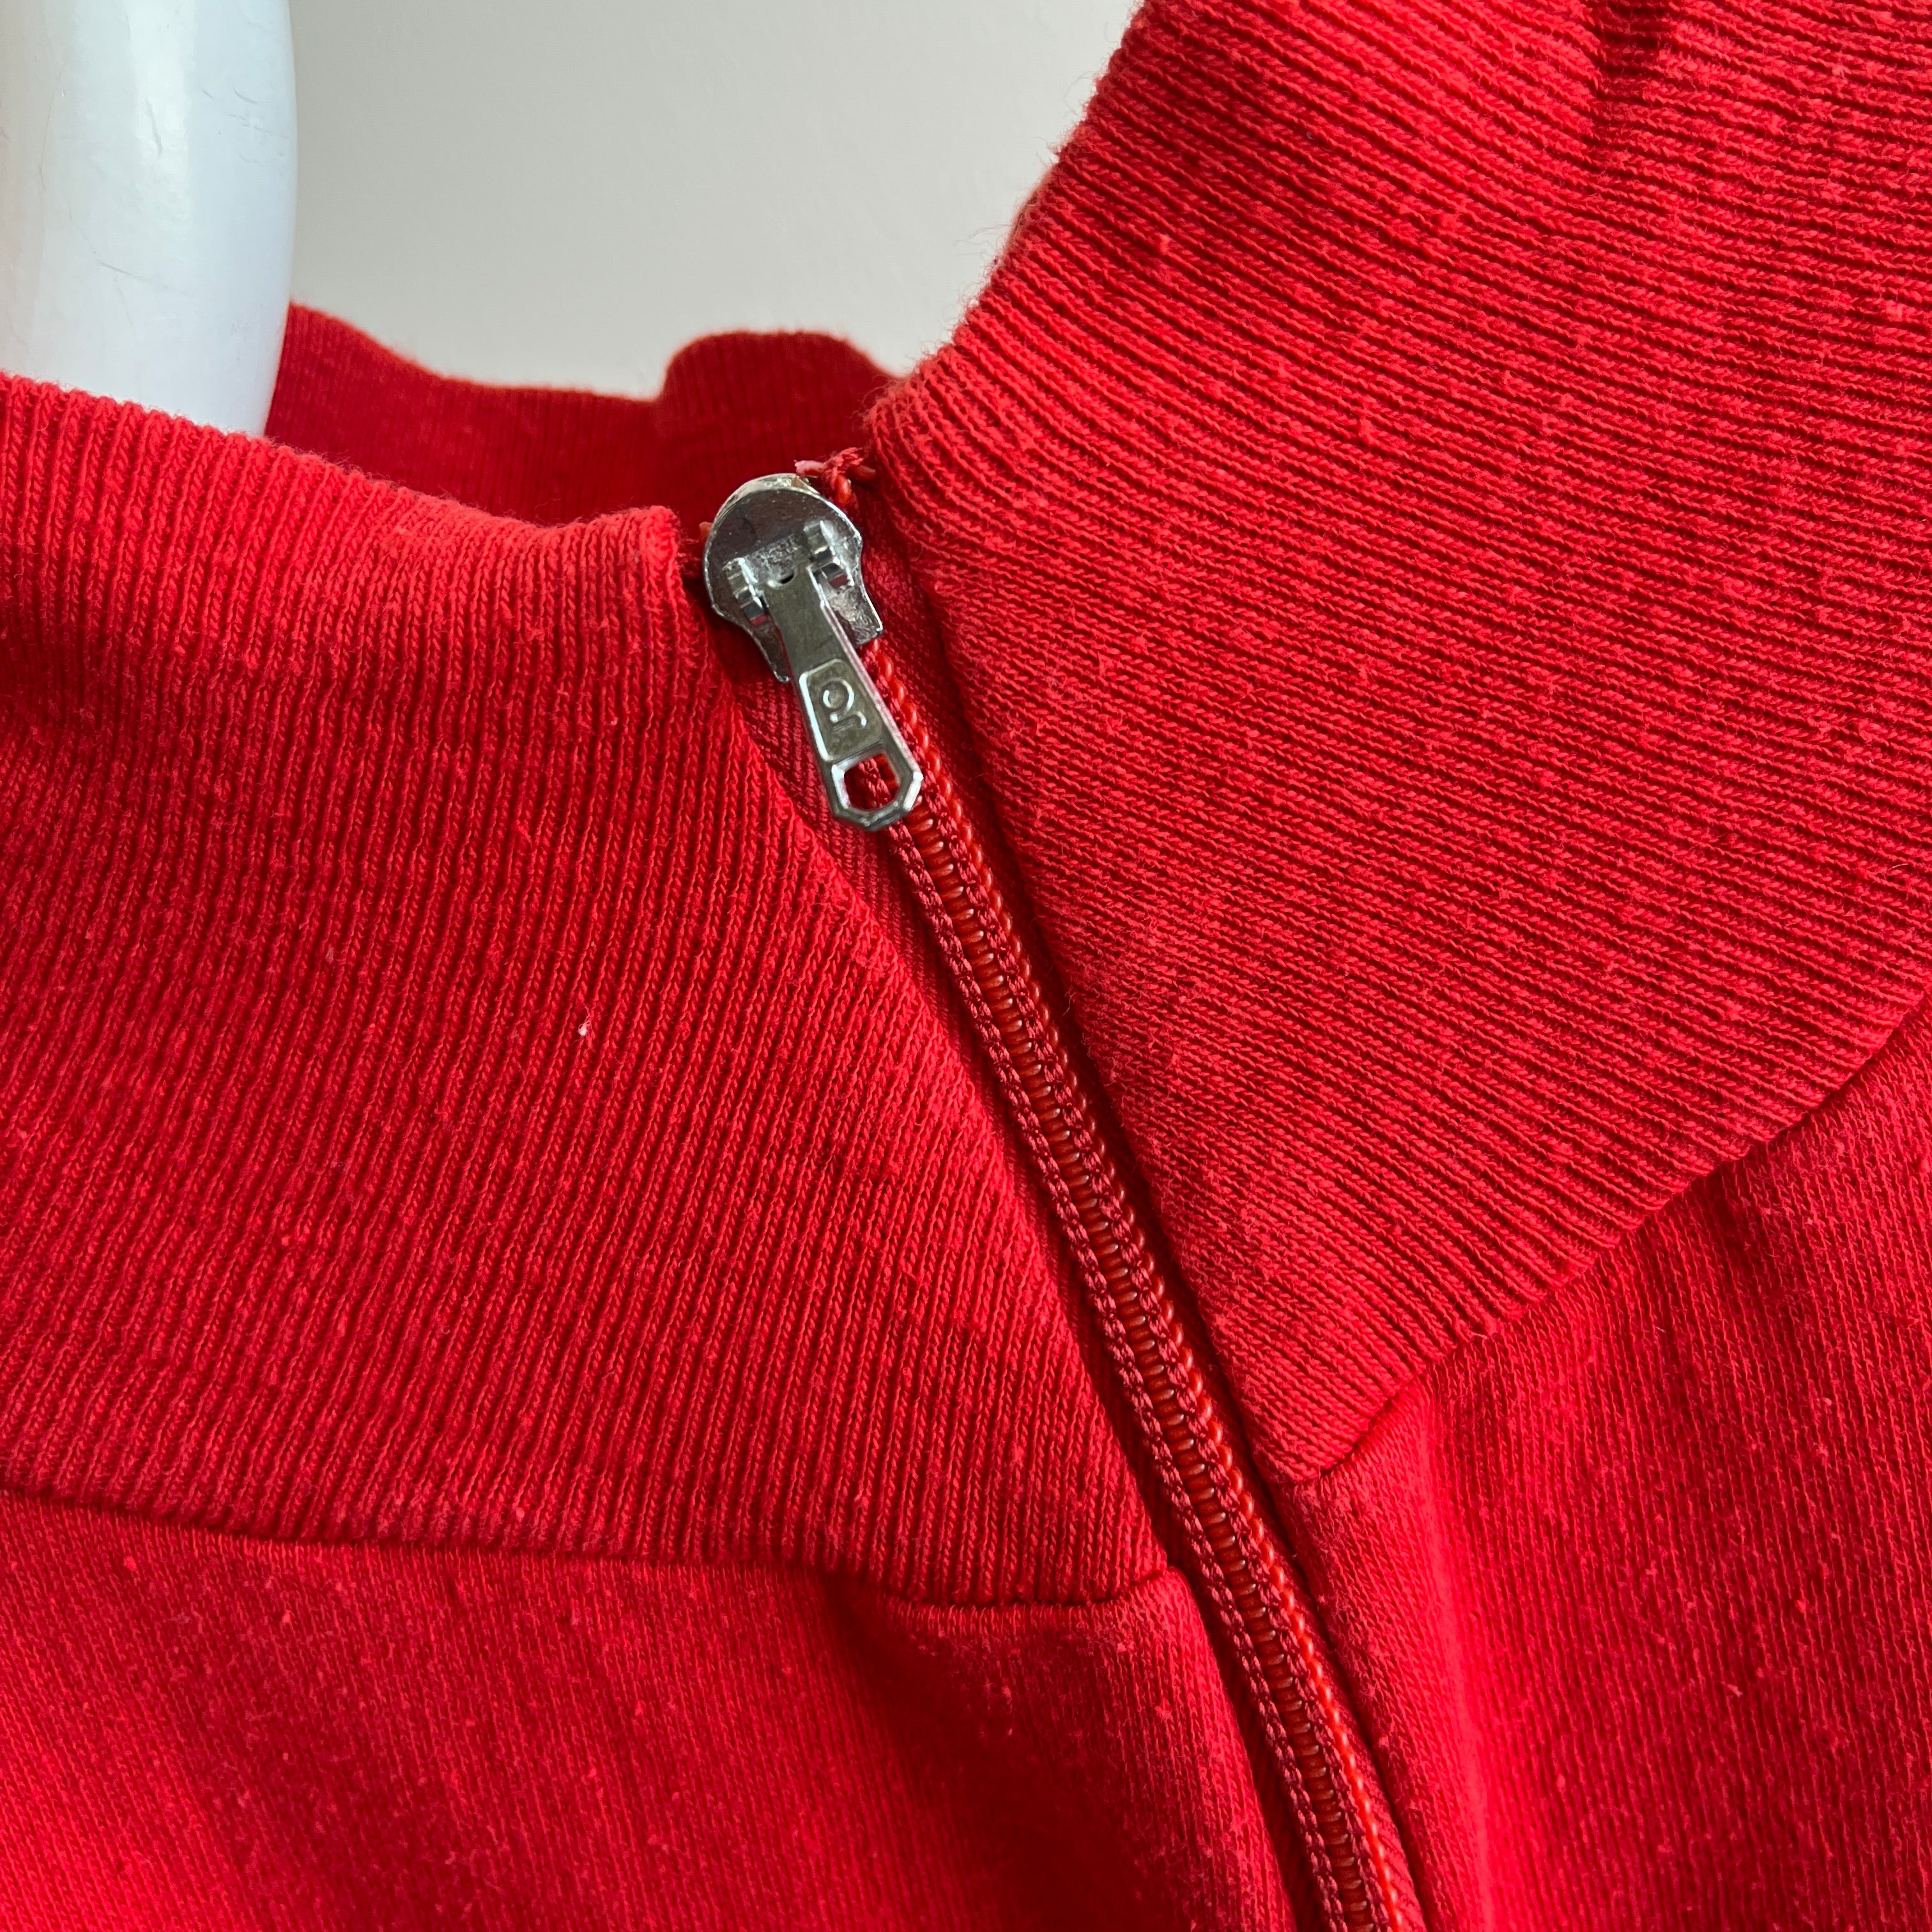 1970s Rad and Unusual Cut Red Quarter Zip Sweatshirt with Pockets!!  by VanCort